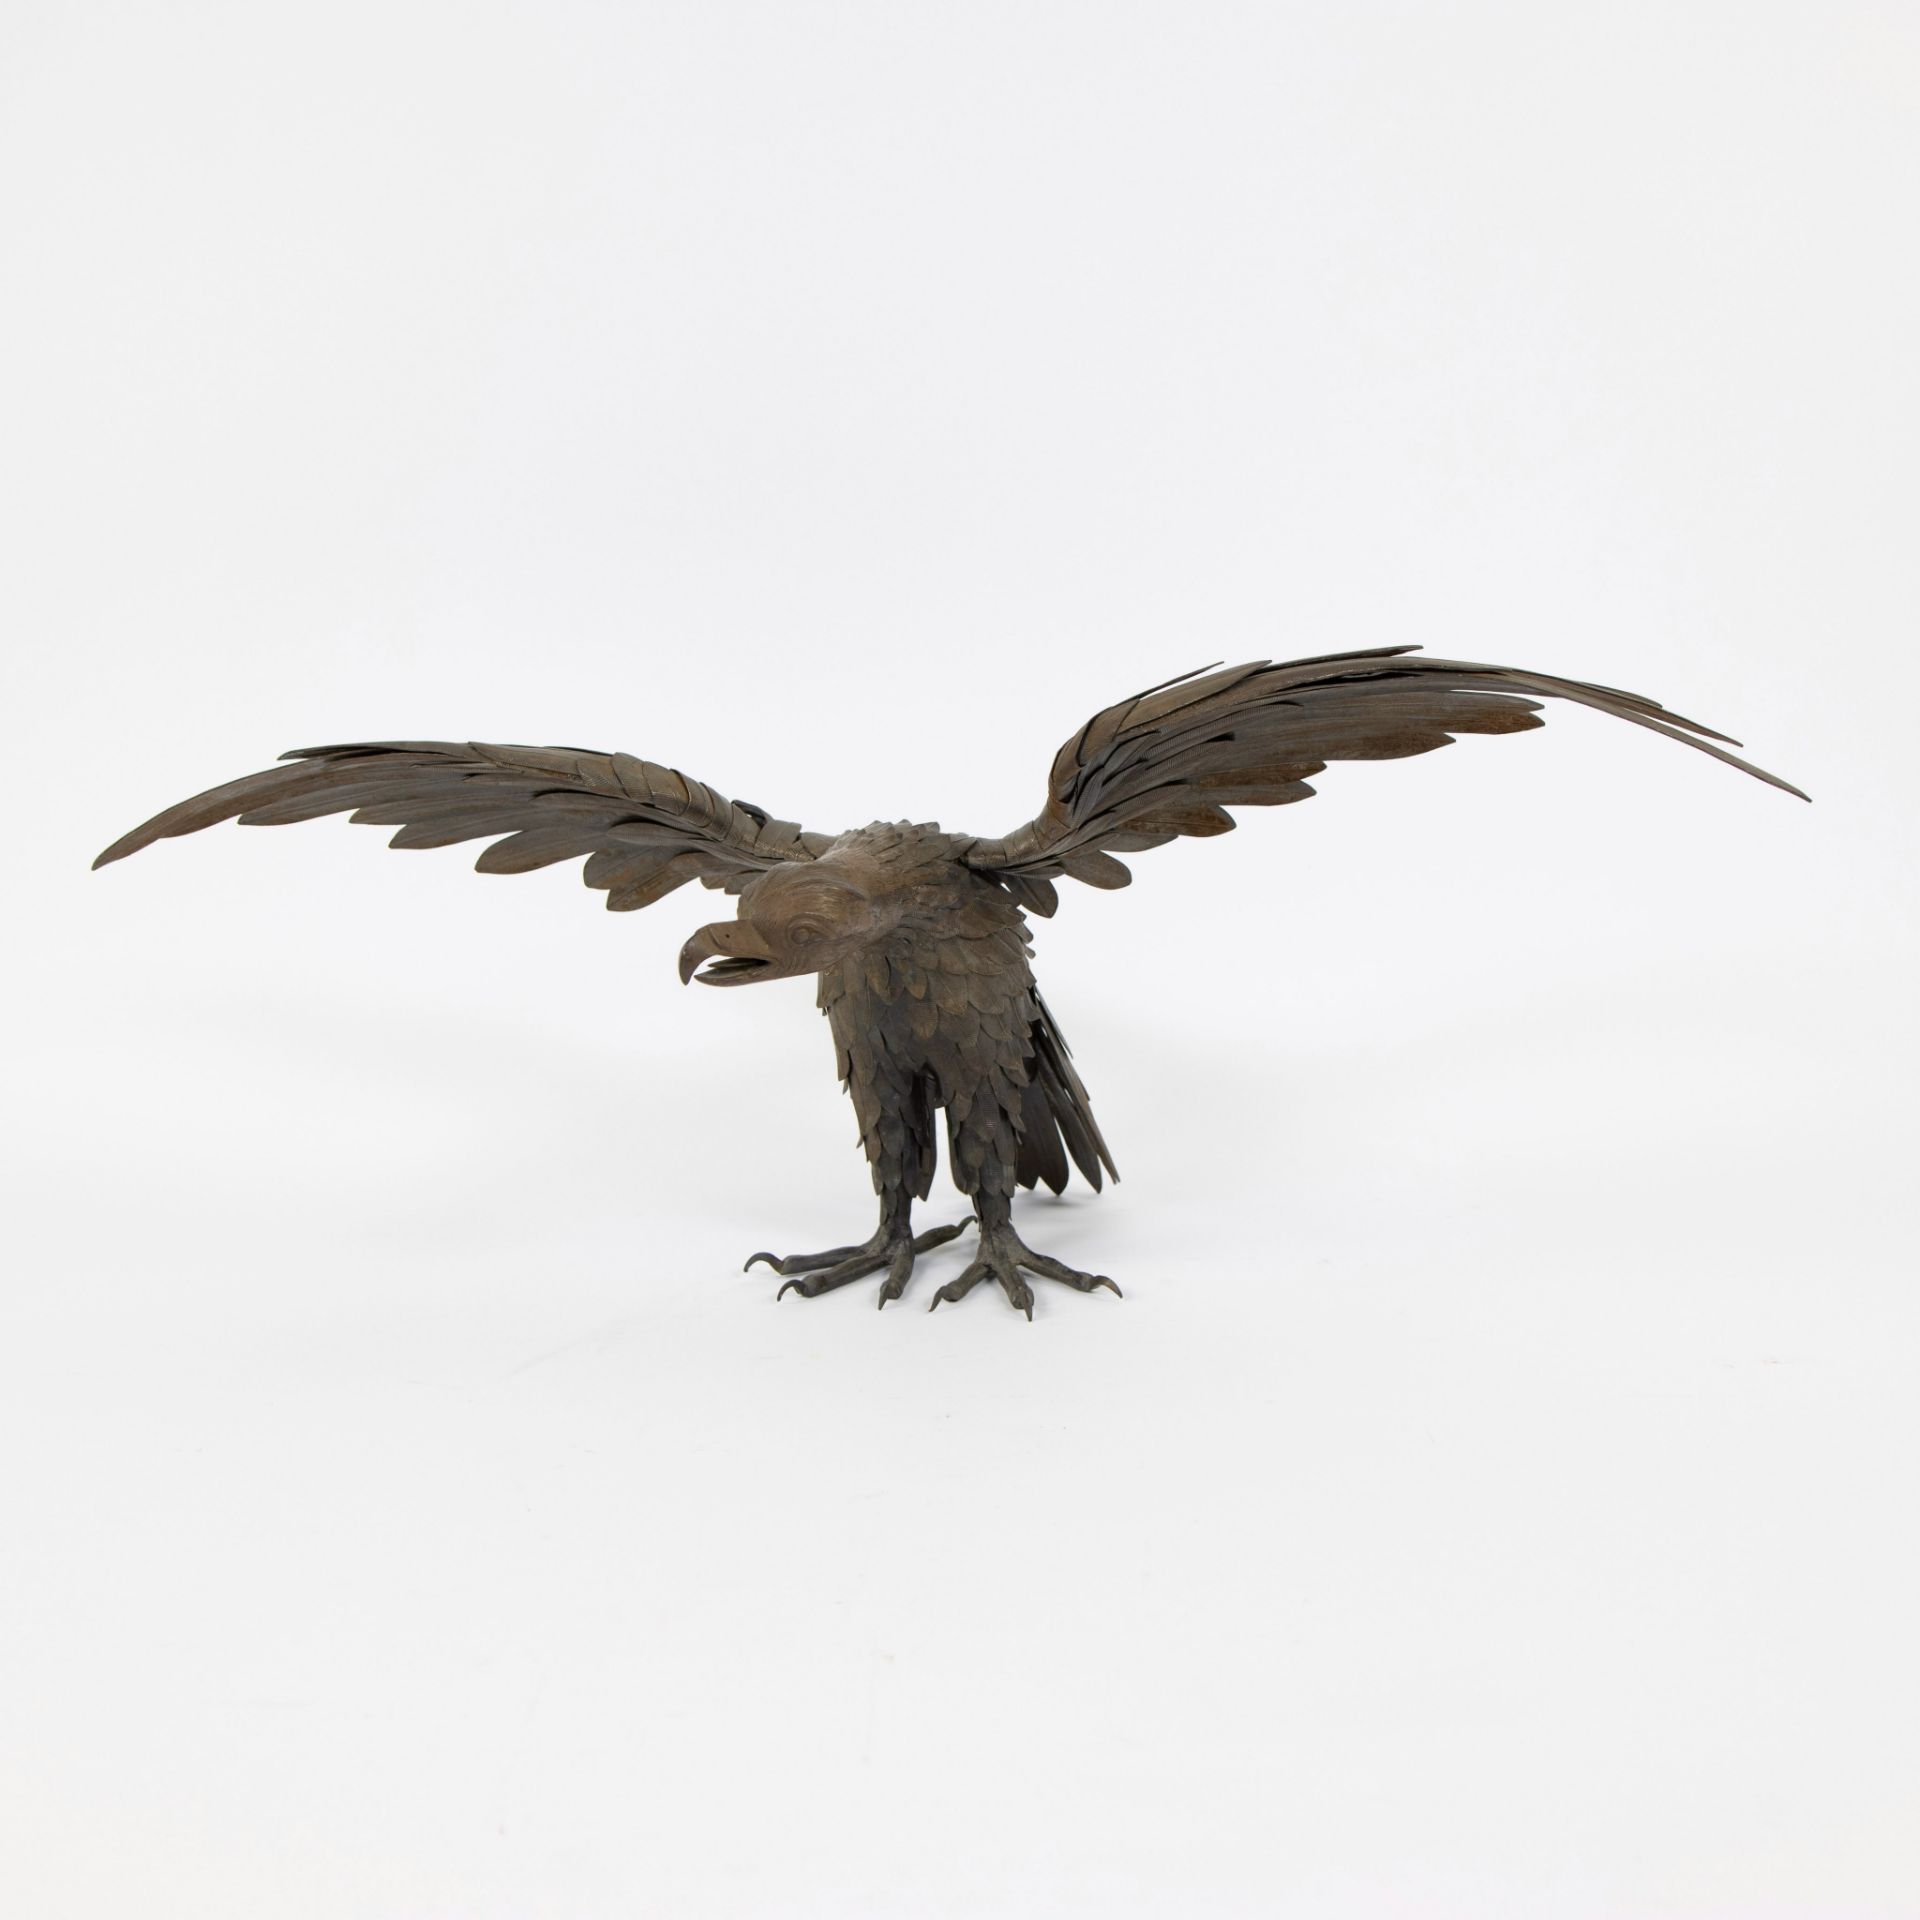 Exceptionally fine wrought iron eagle